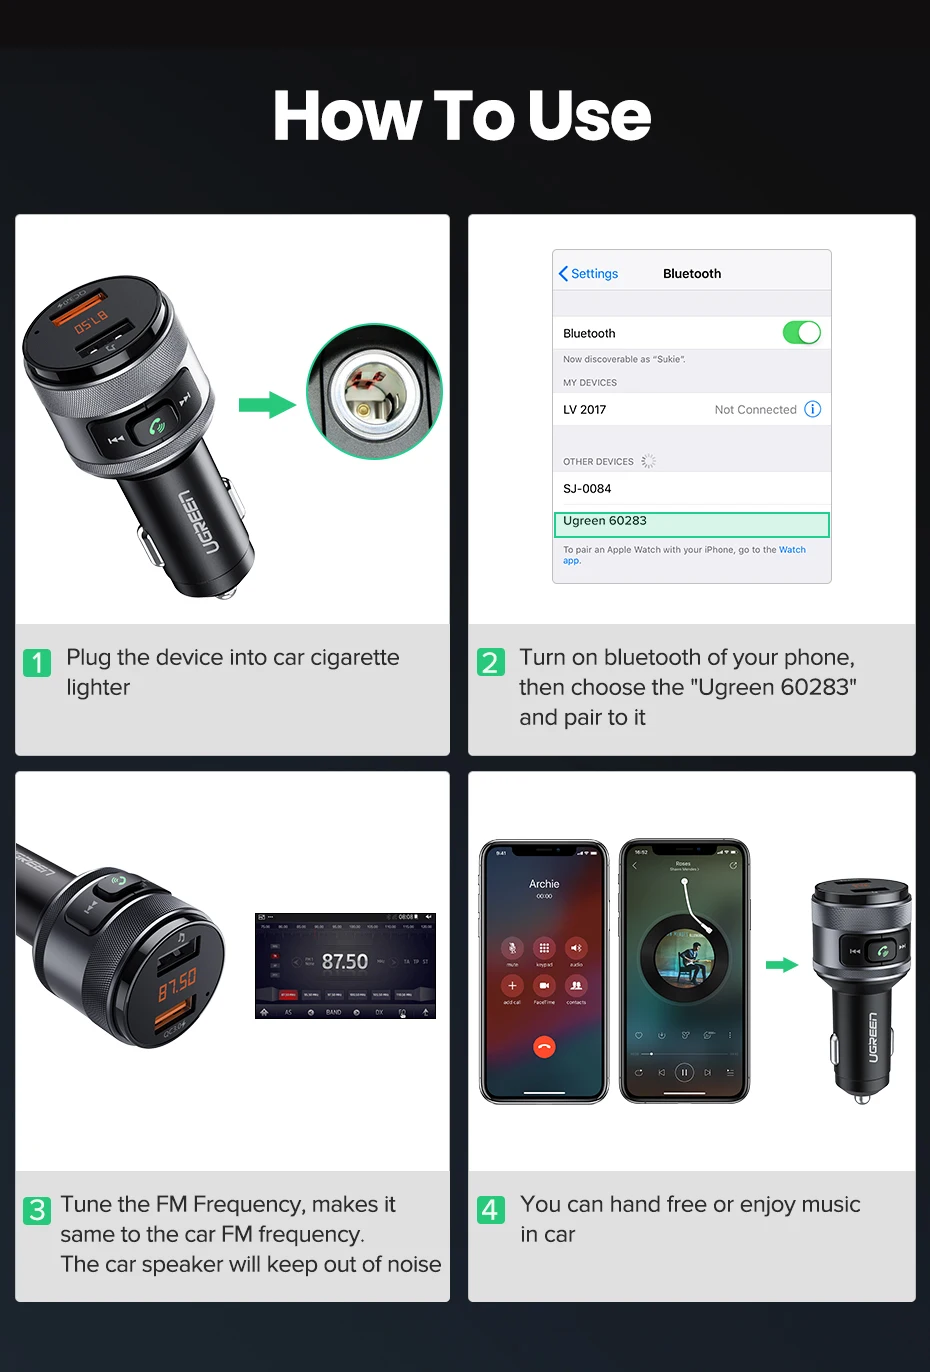 Ugreen usb car charger bluetooth qc quick 3.0 charge fast charger for xiaomi samsung iphone huawei (fm transmitter)